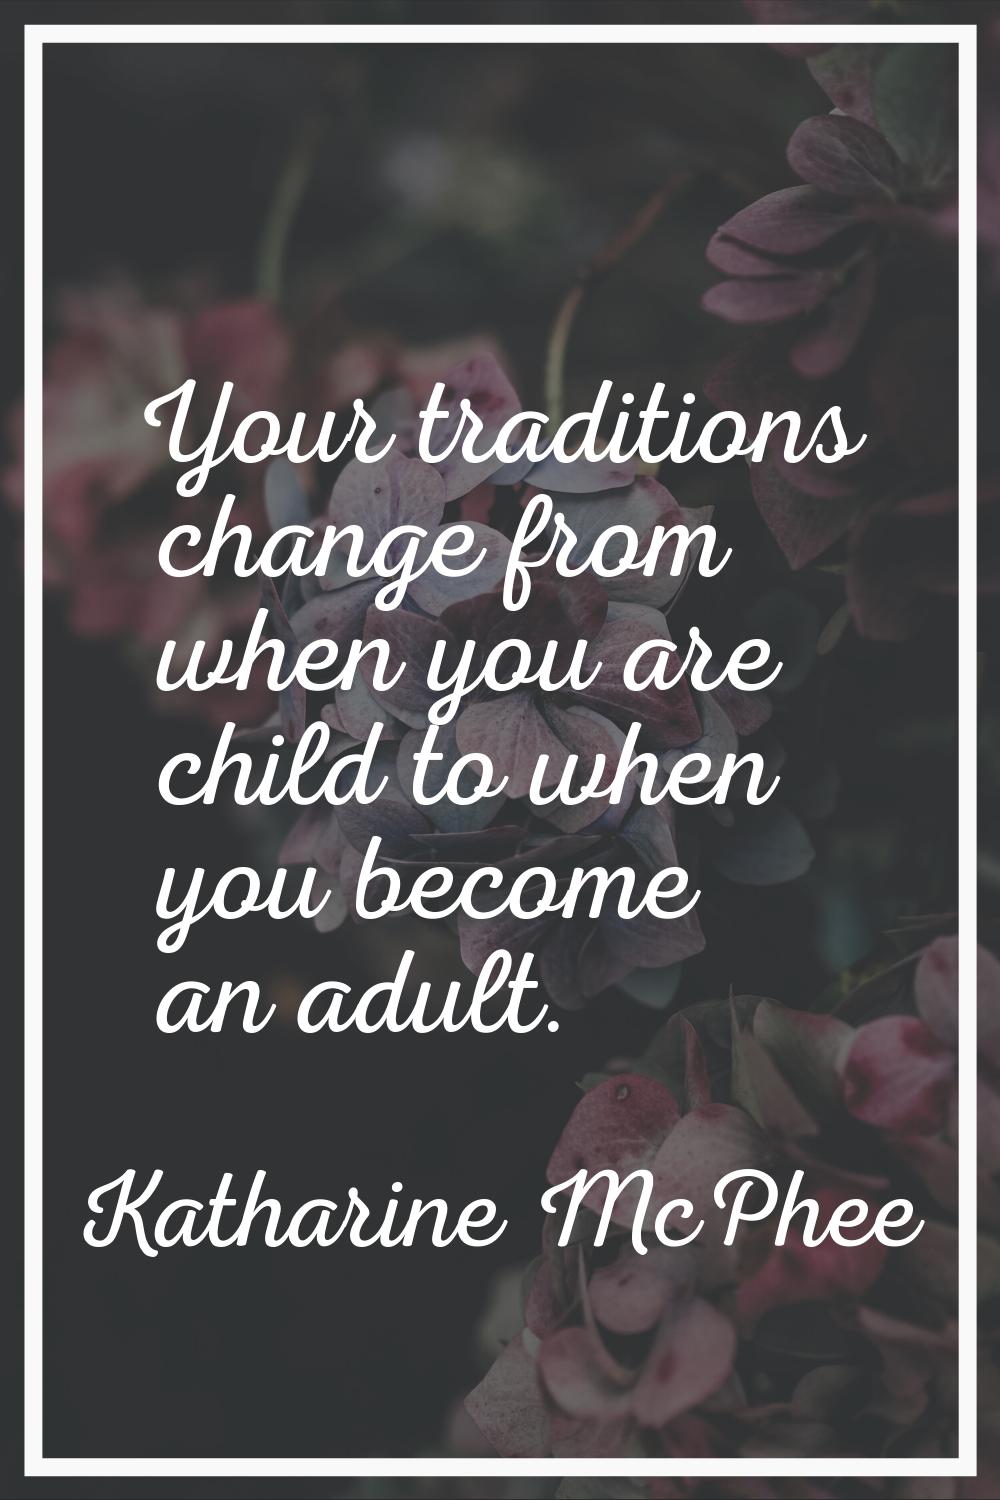 Your traditions change from when you are child to when you become an adult.